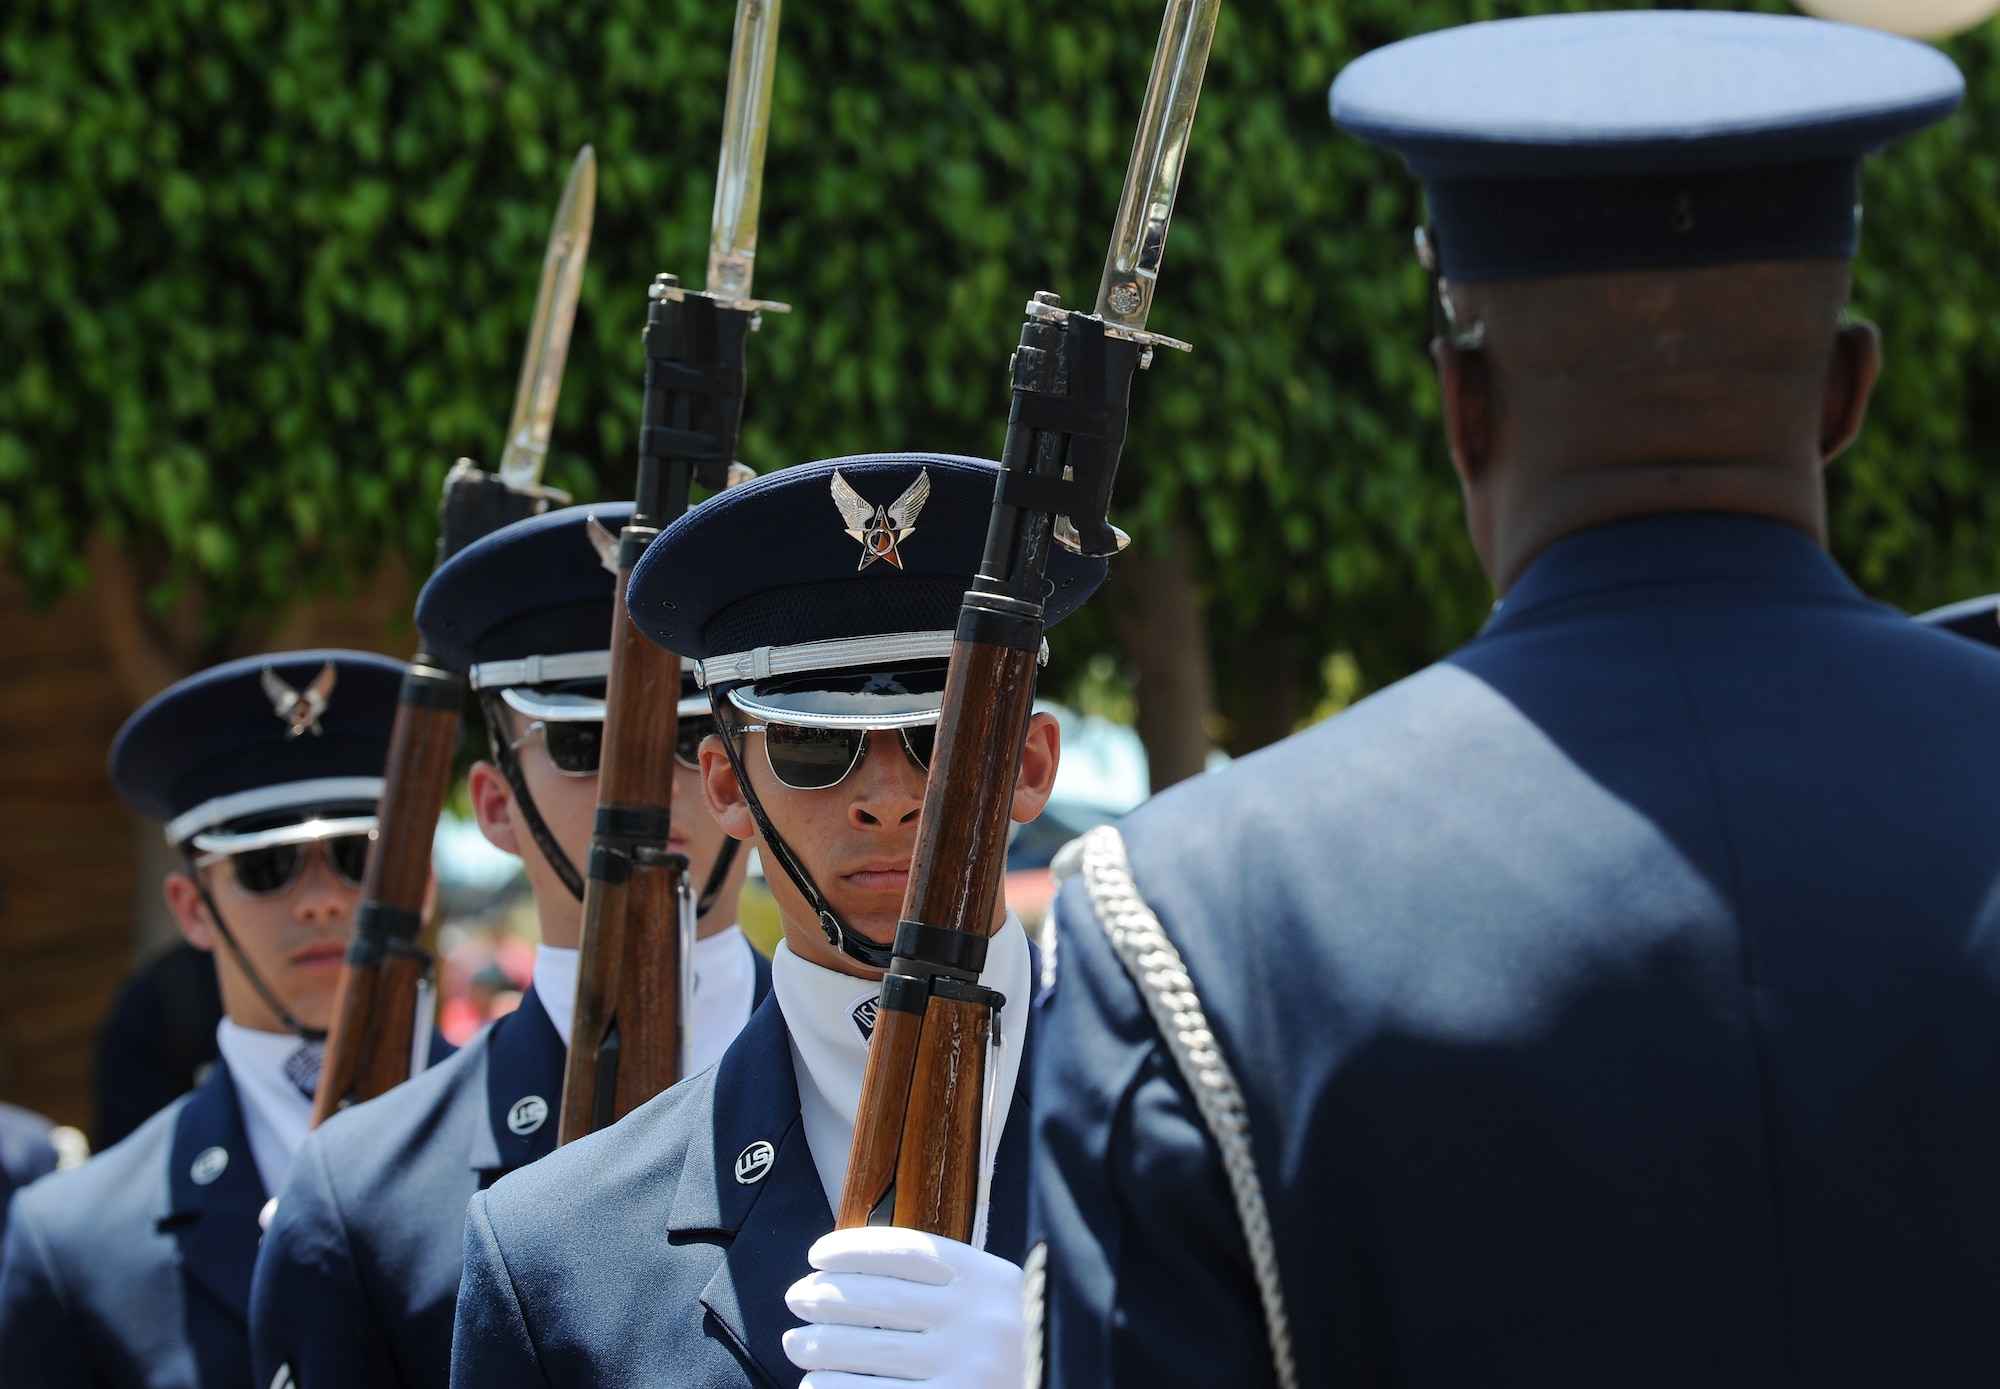 The Unites States Air Force Honor Guard drill team stands in formation during a drill performance at Disney's California Adventure in Anaheim, Calif., July 2, 2015. The HG is scheduled to perform six to seven times daily throughout the Fourth of July weekend. (U.S Air Force photo/Staff Sgt. Nichelle Anderson)